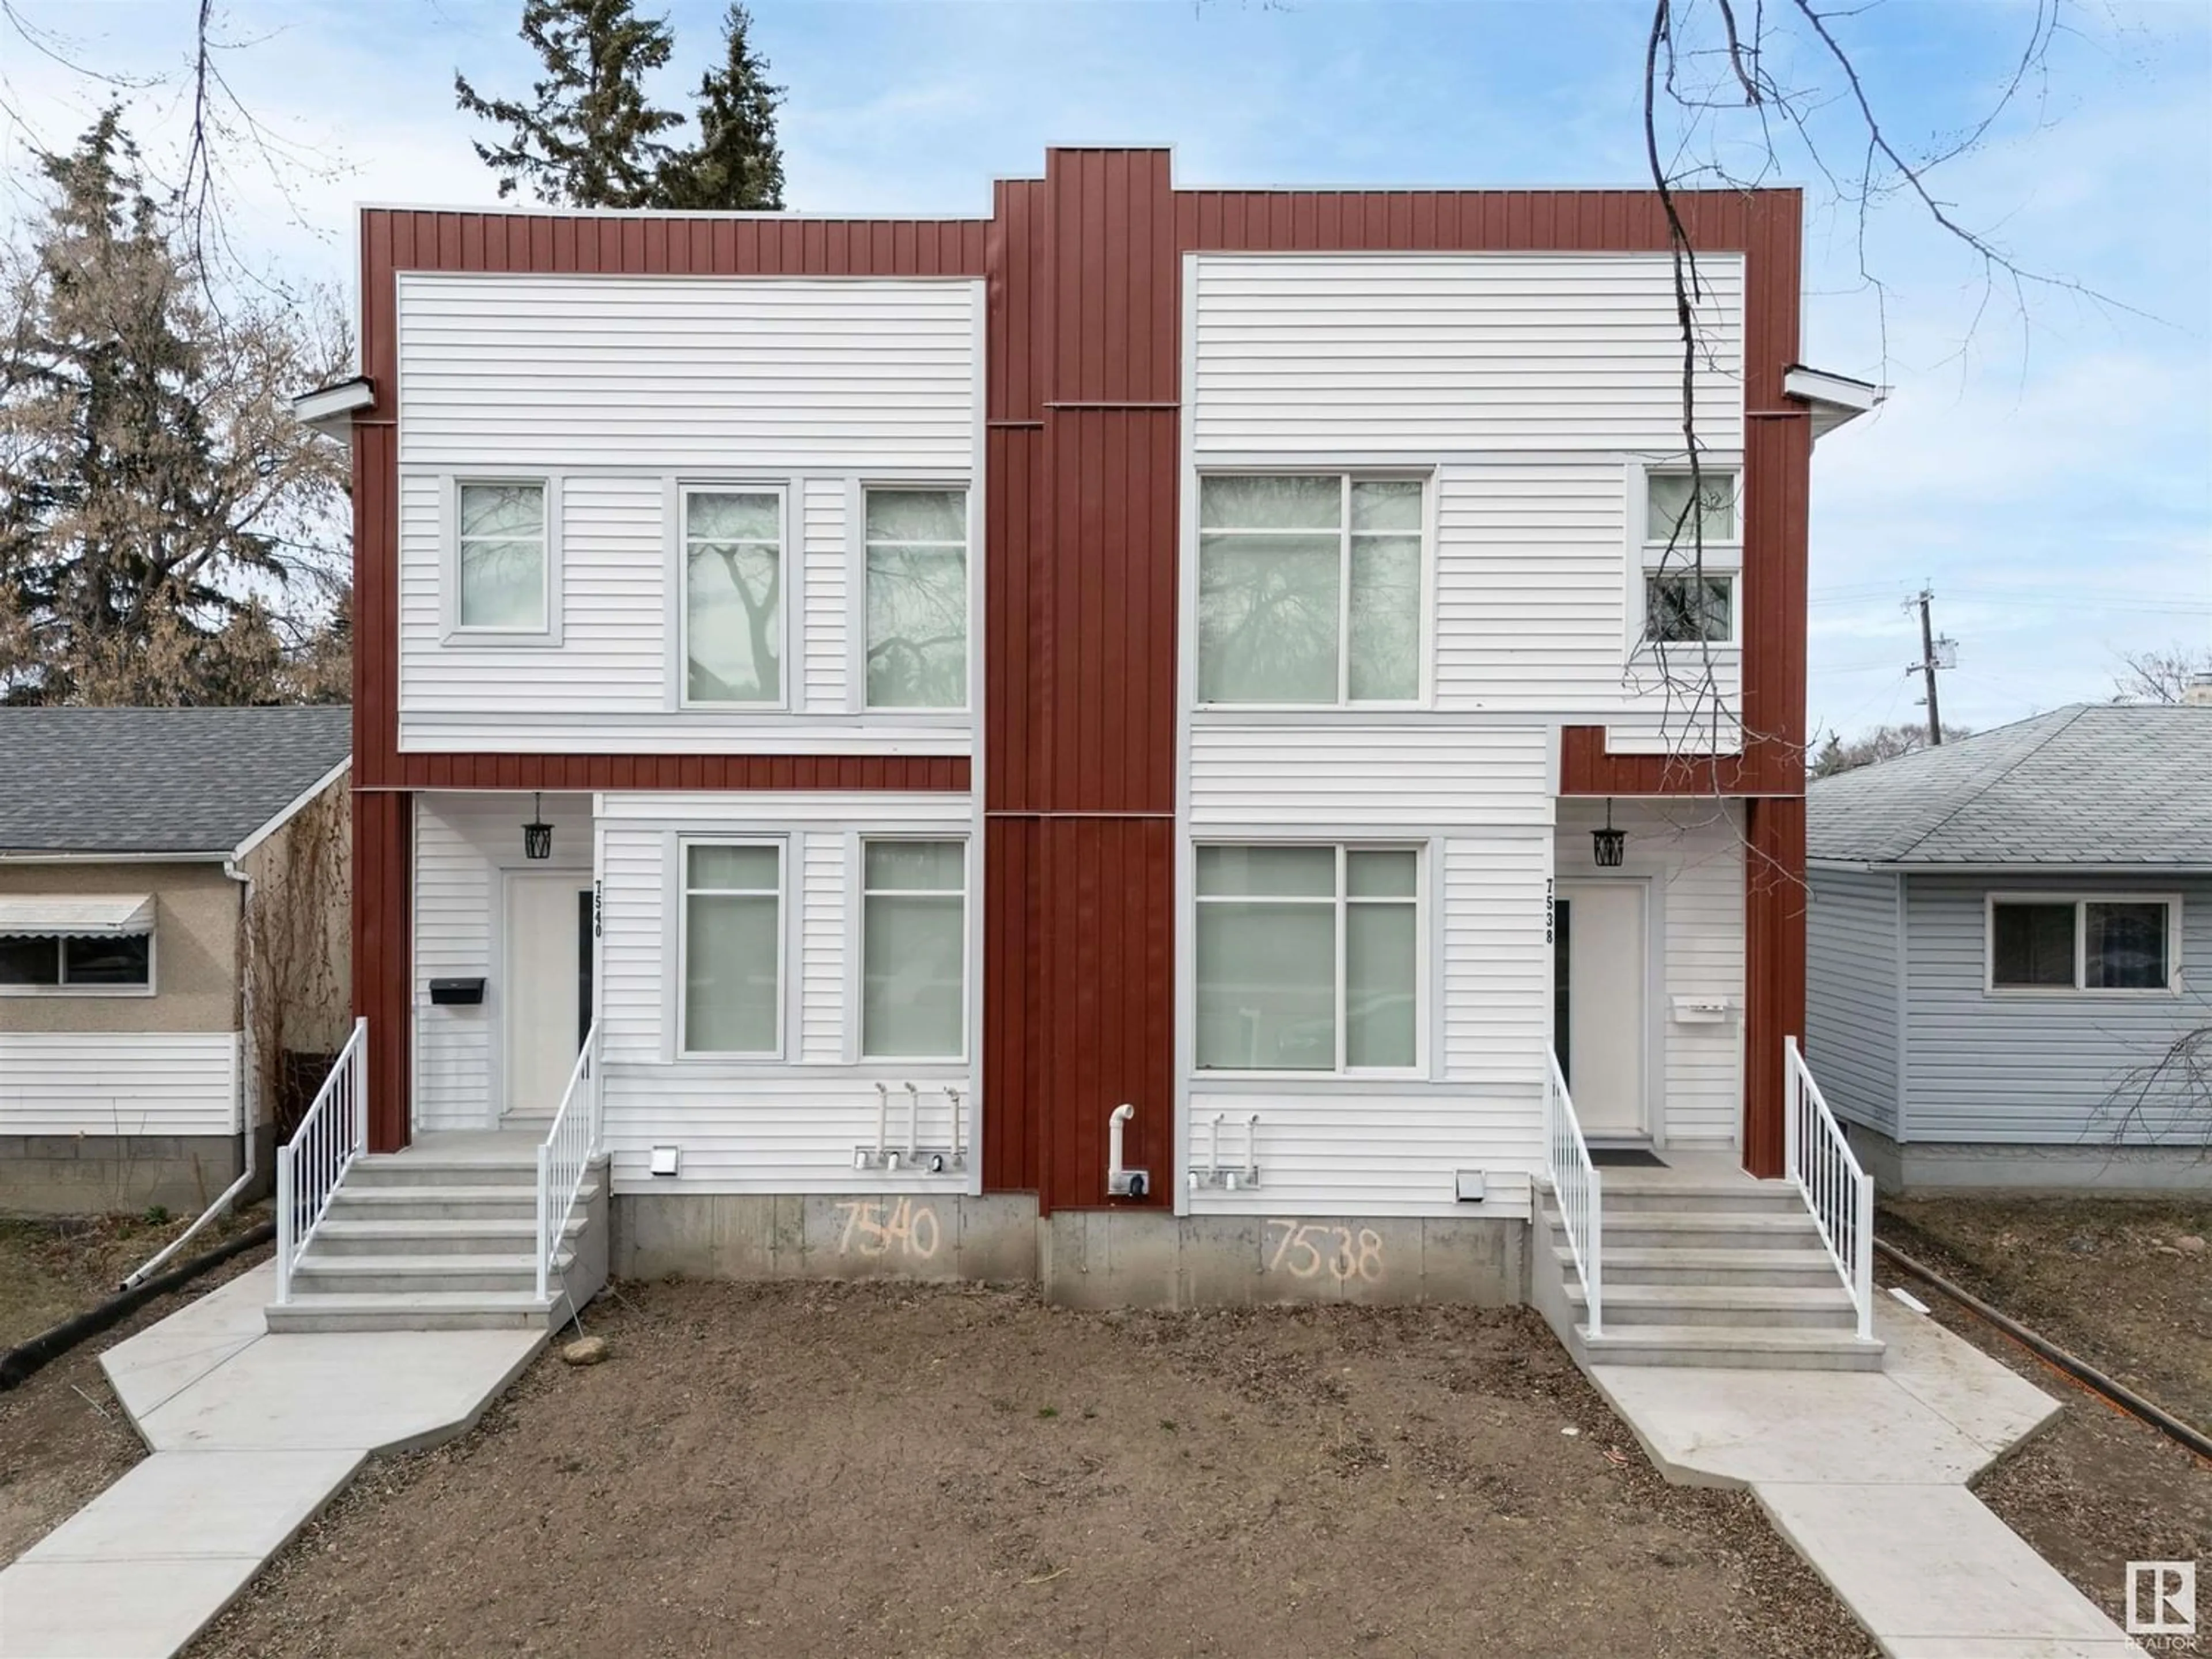 A pic from exterior of the house or condo for 7538 81 Ave NW, Edmonton Alberta T6C0V5